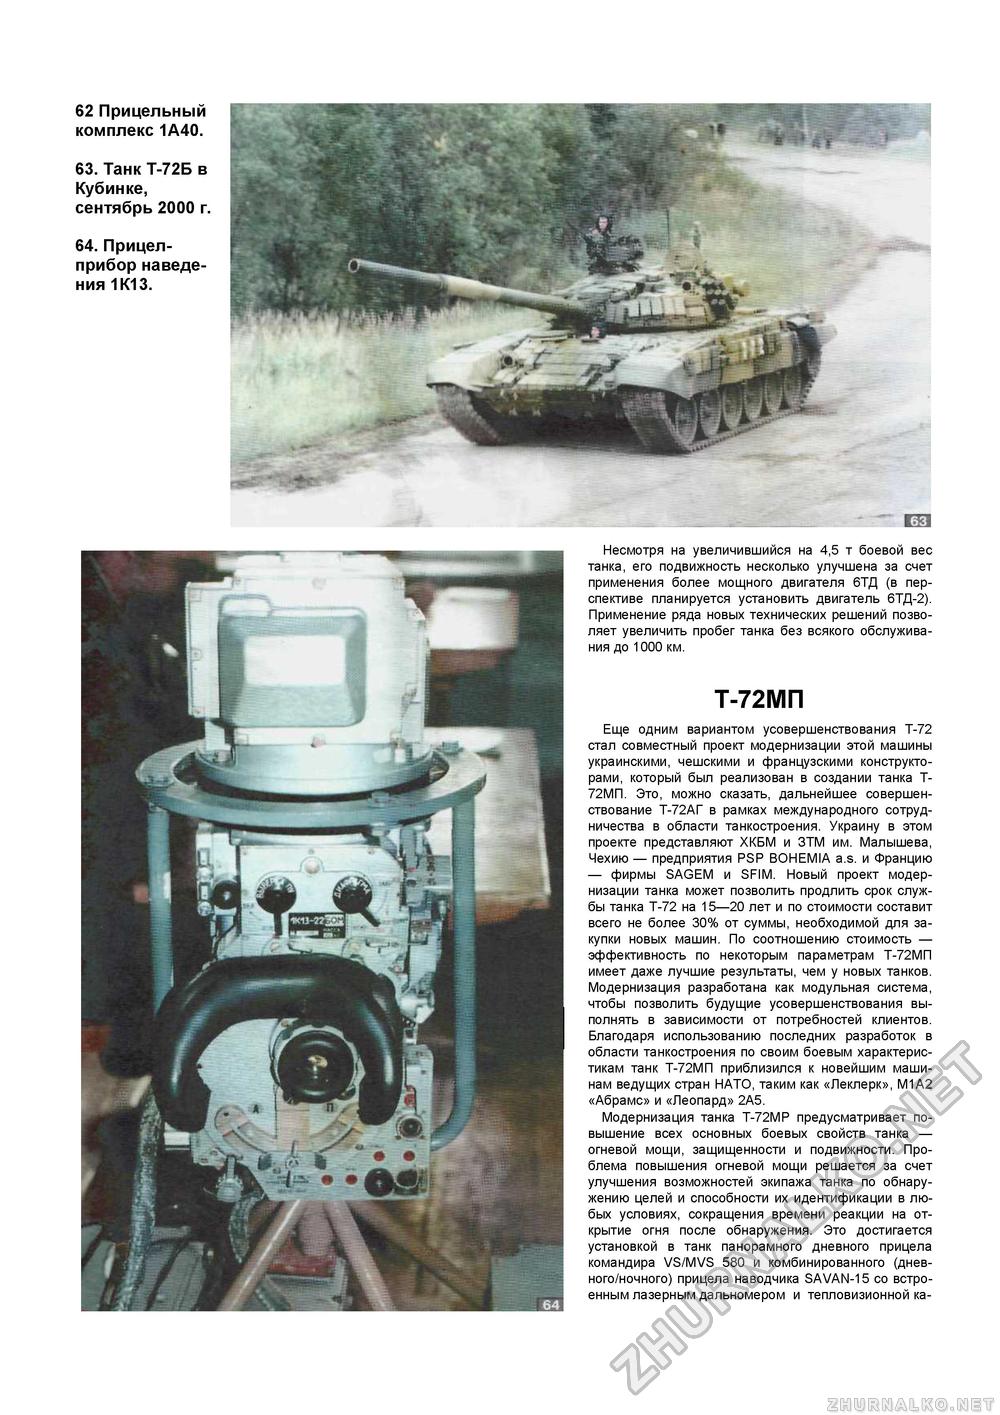  Special -  T-72,  43